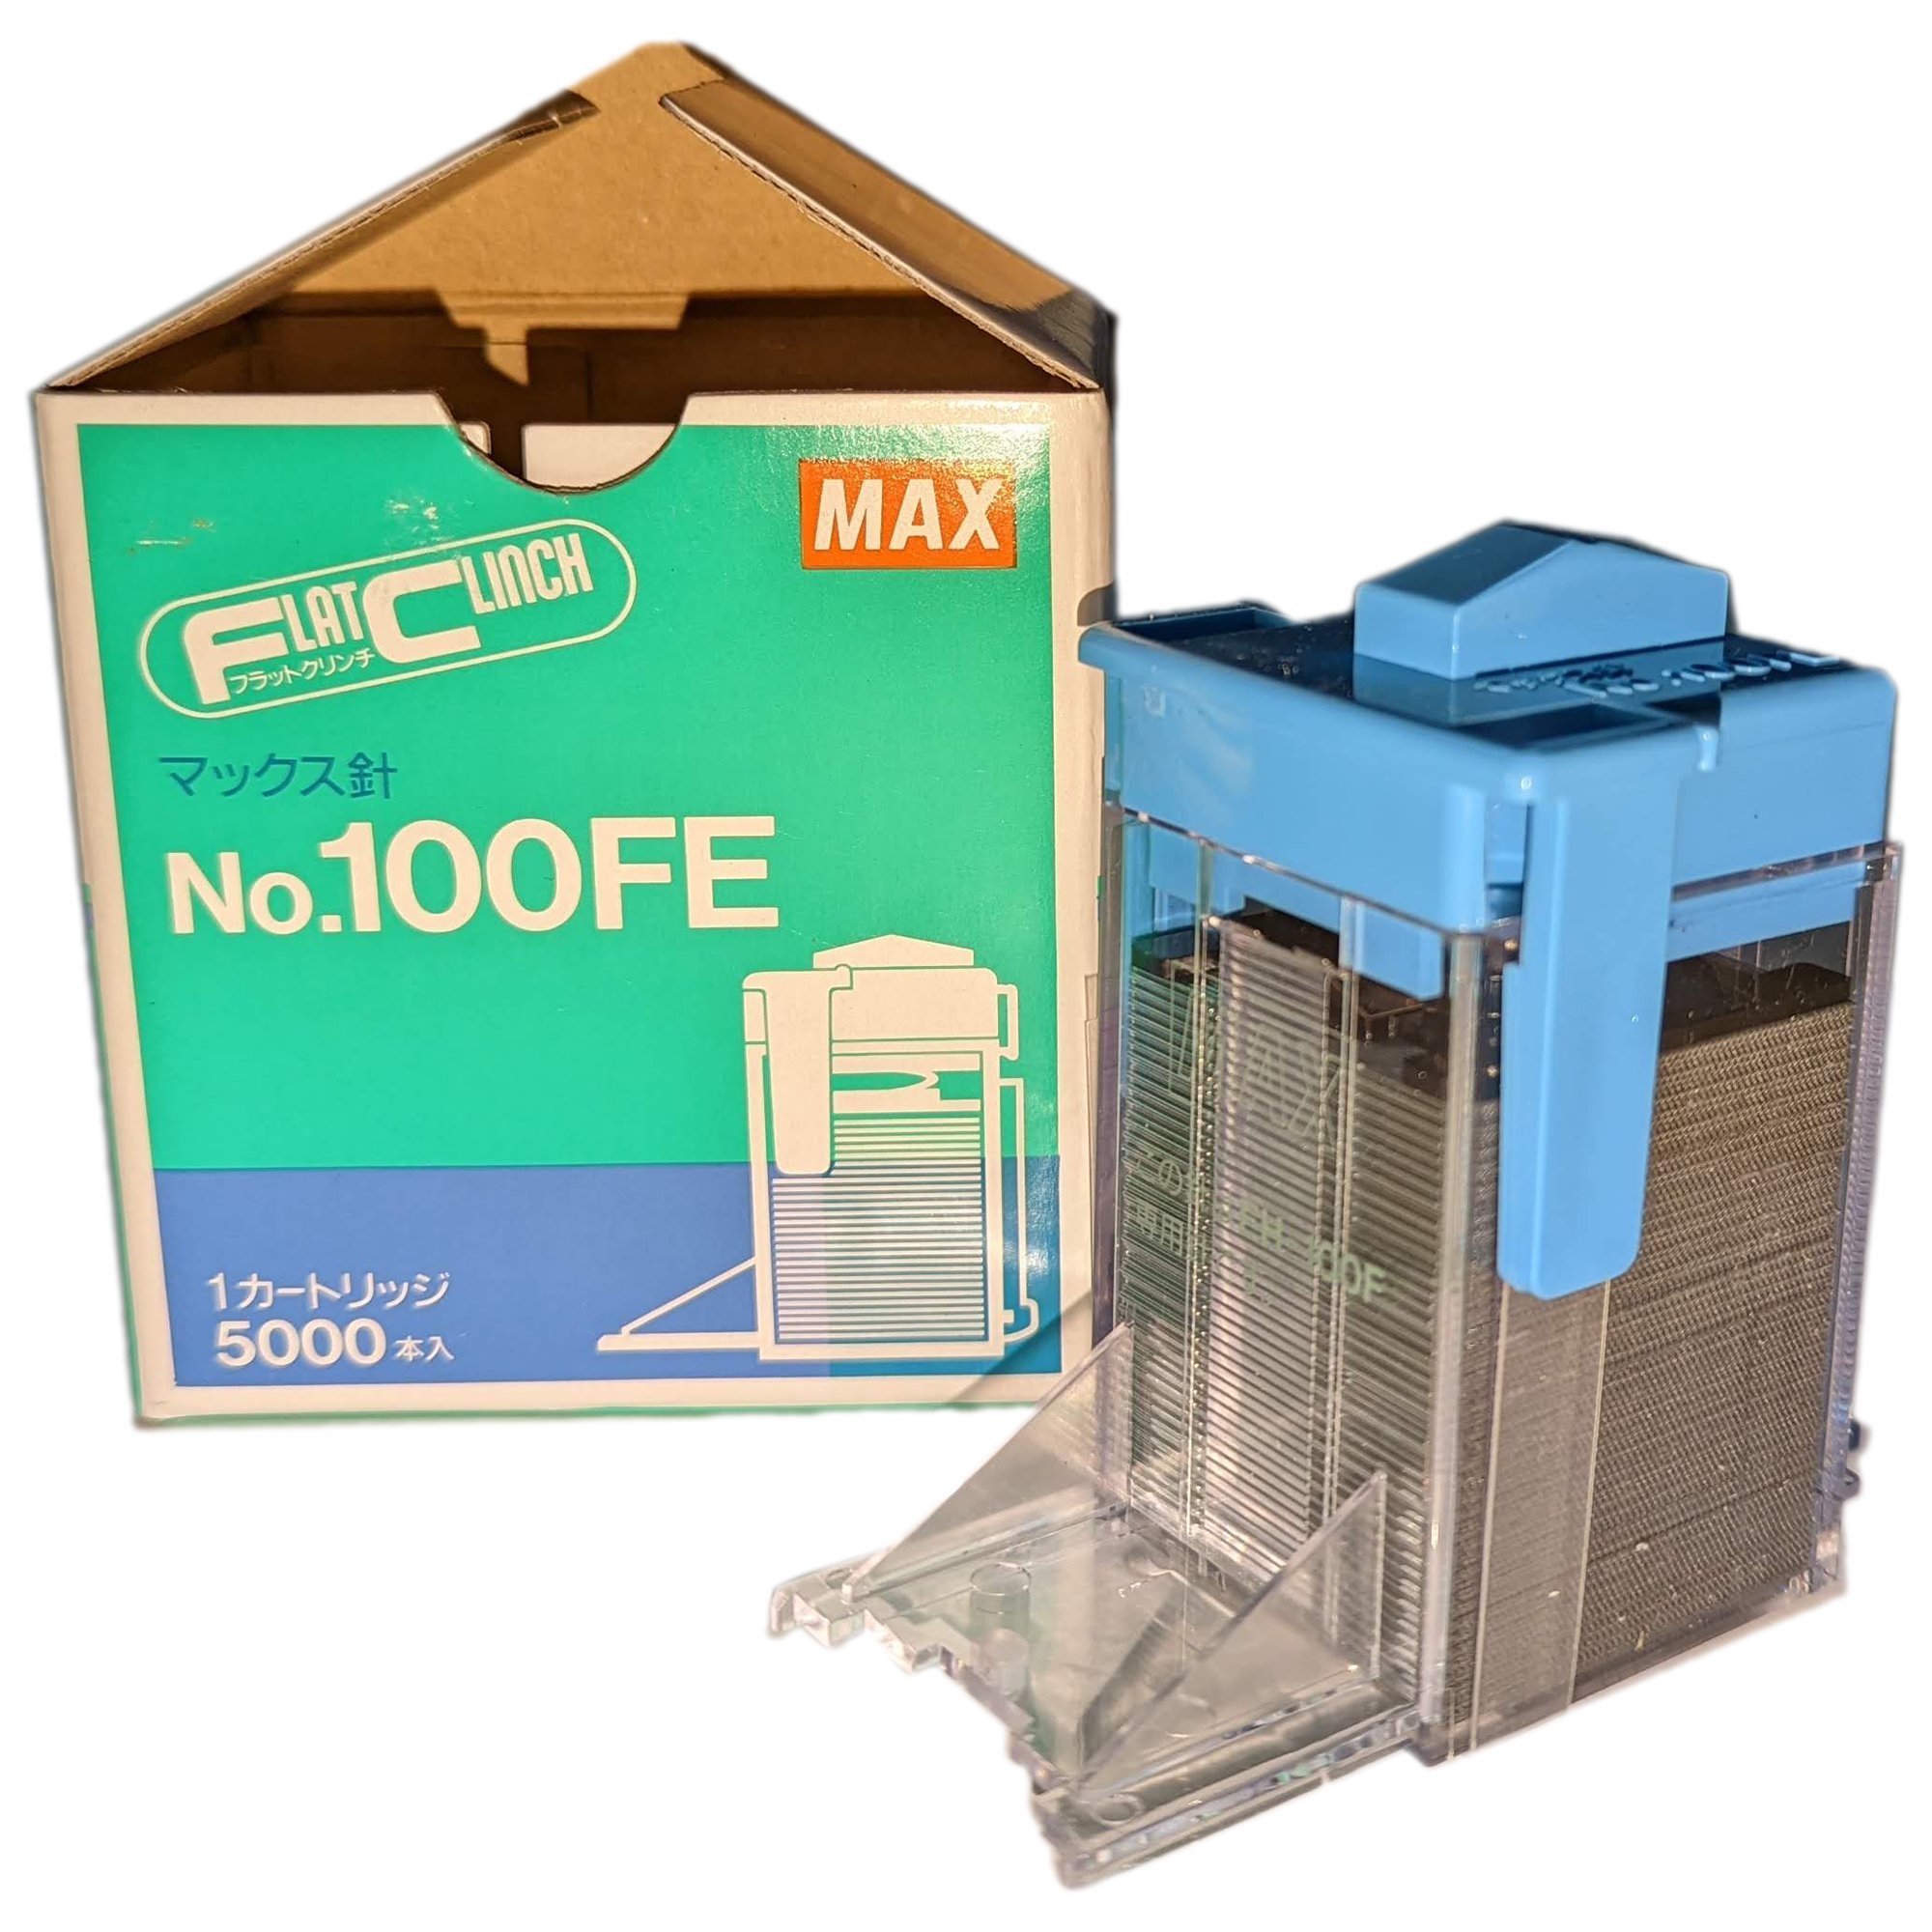 Max 100FE Staple Cartridge EH-100F - Click Image to Close